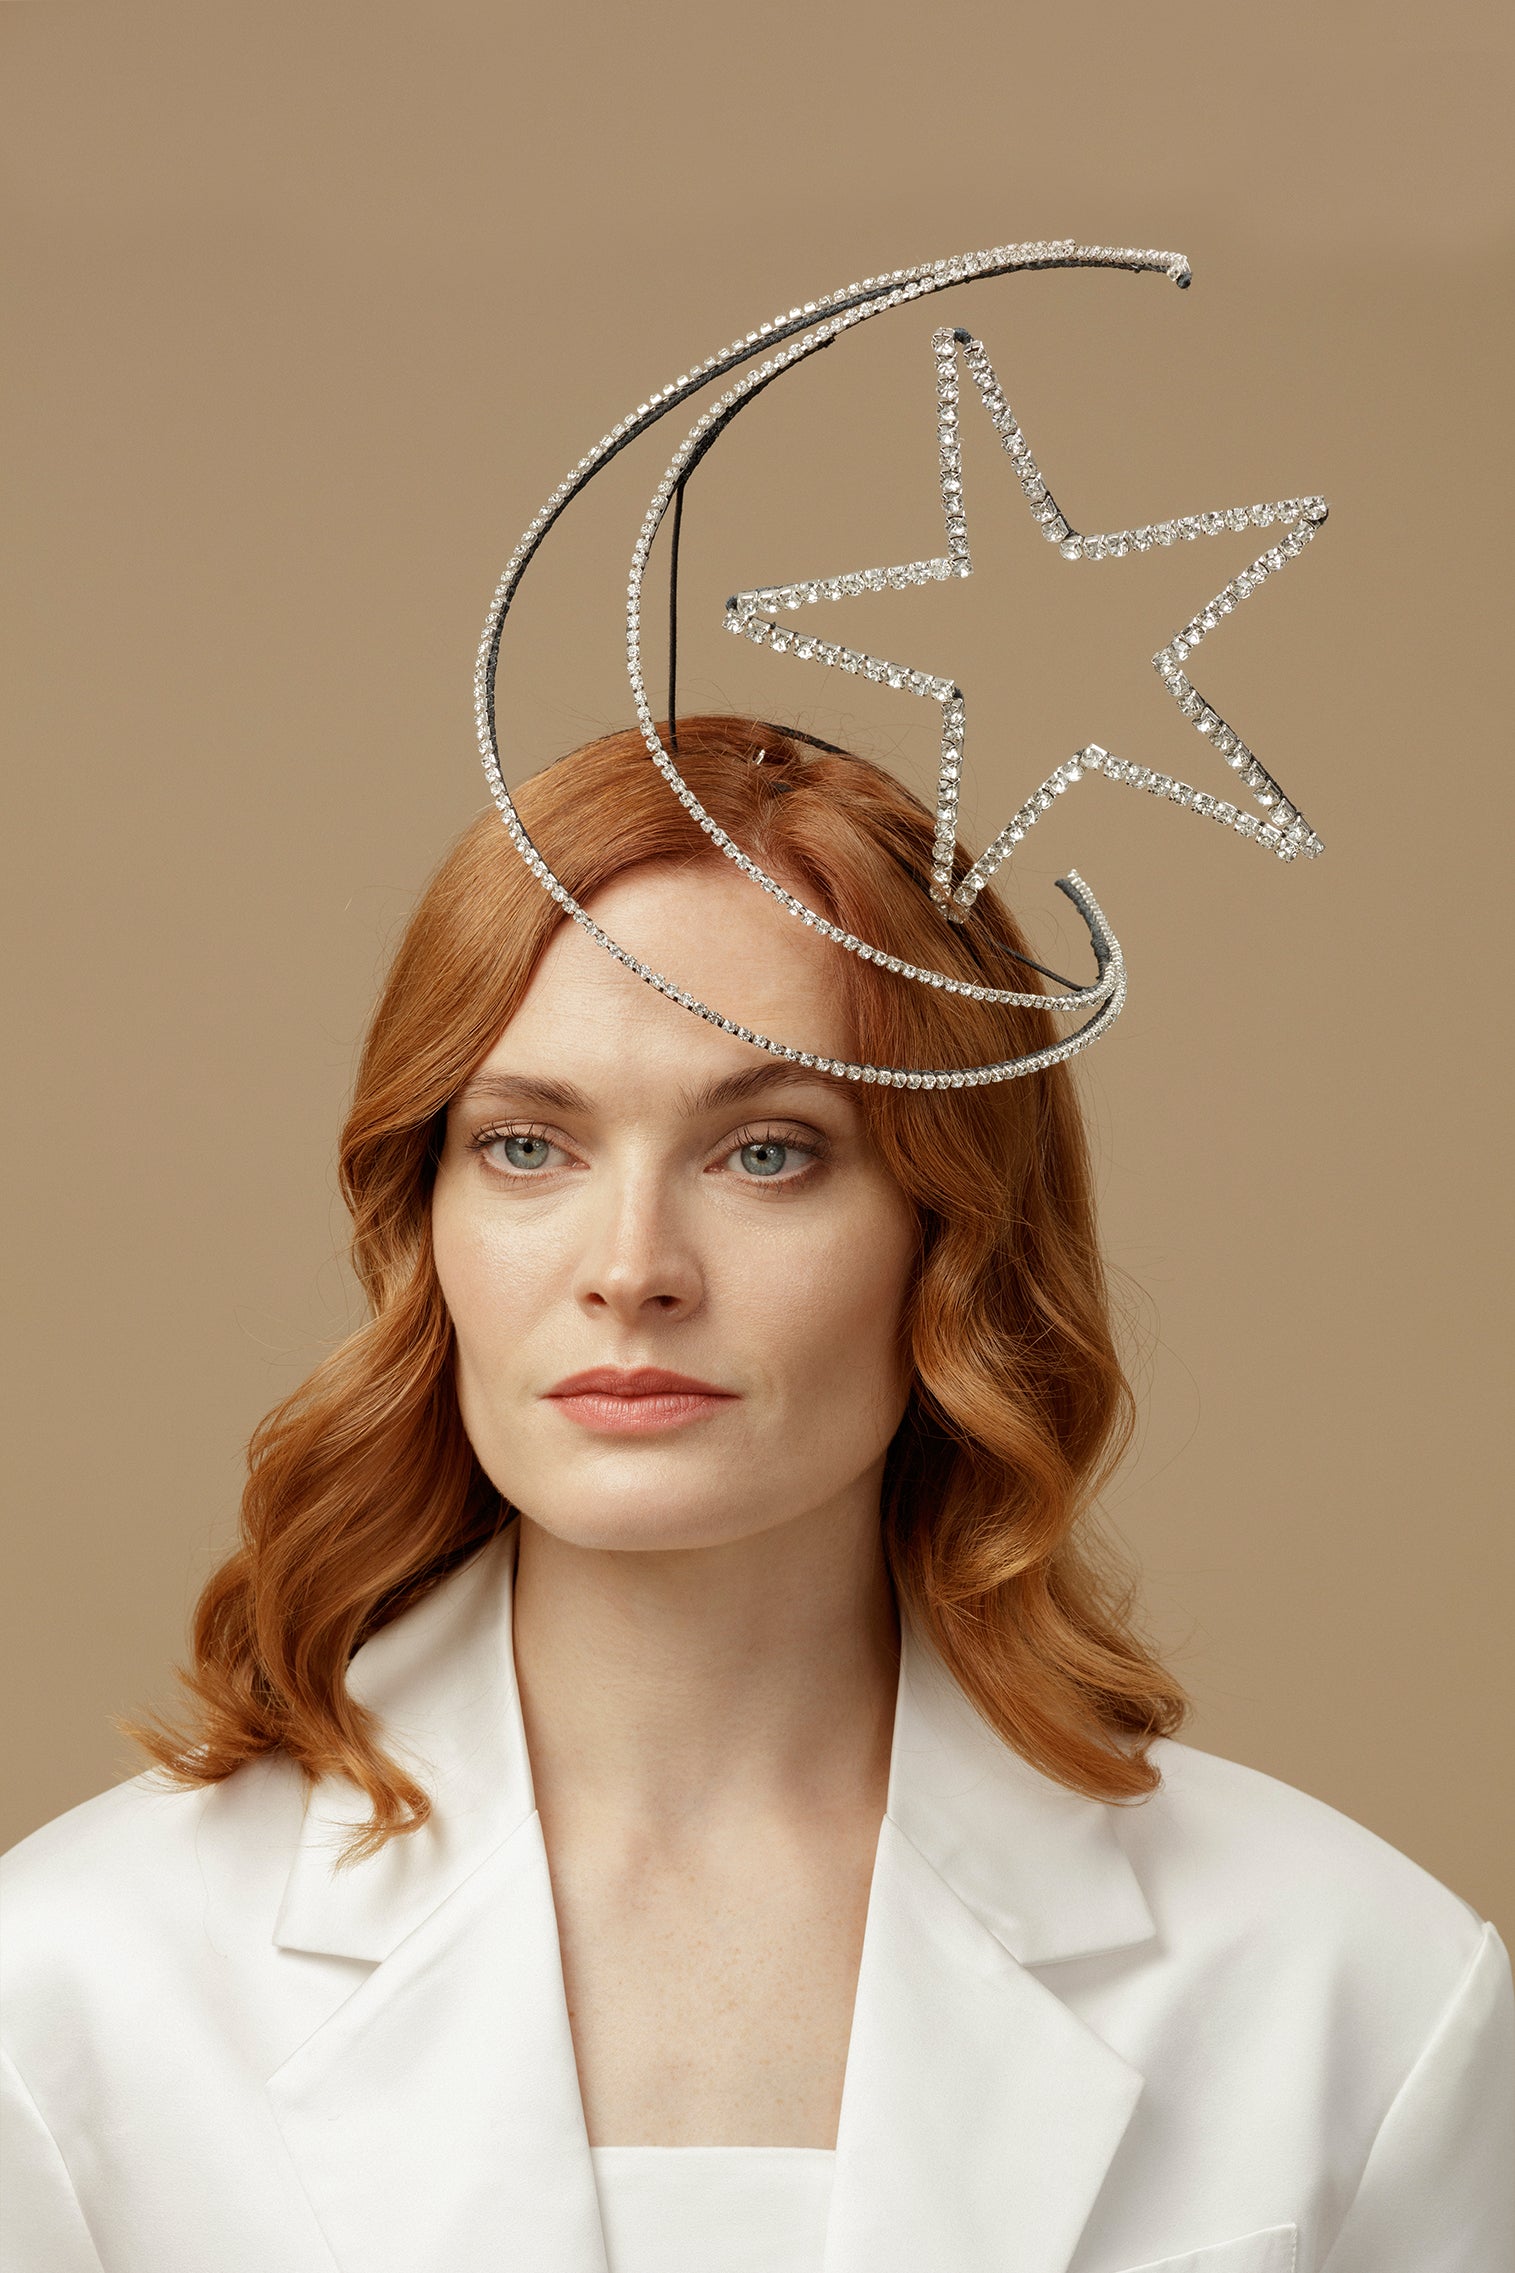 Soho Headpiece - Lock Couture by Awon Golding - Lock & Co. Hatters London UK